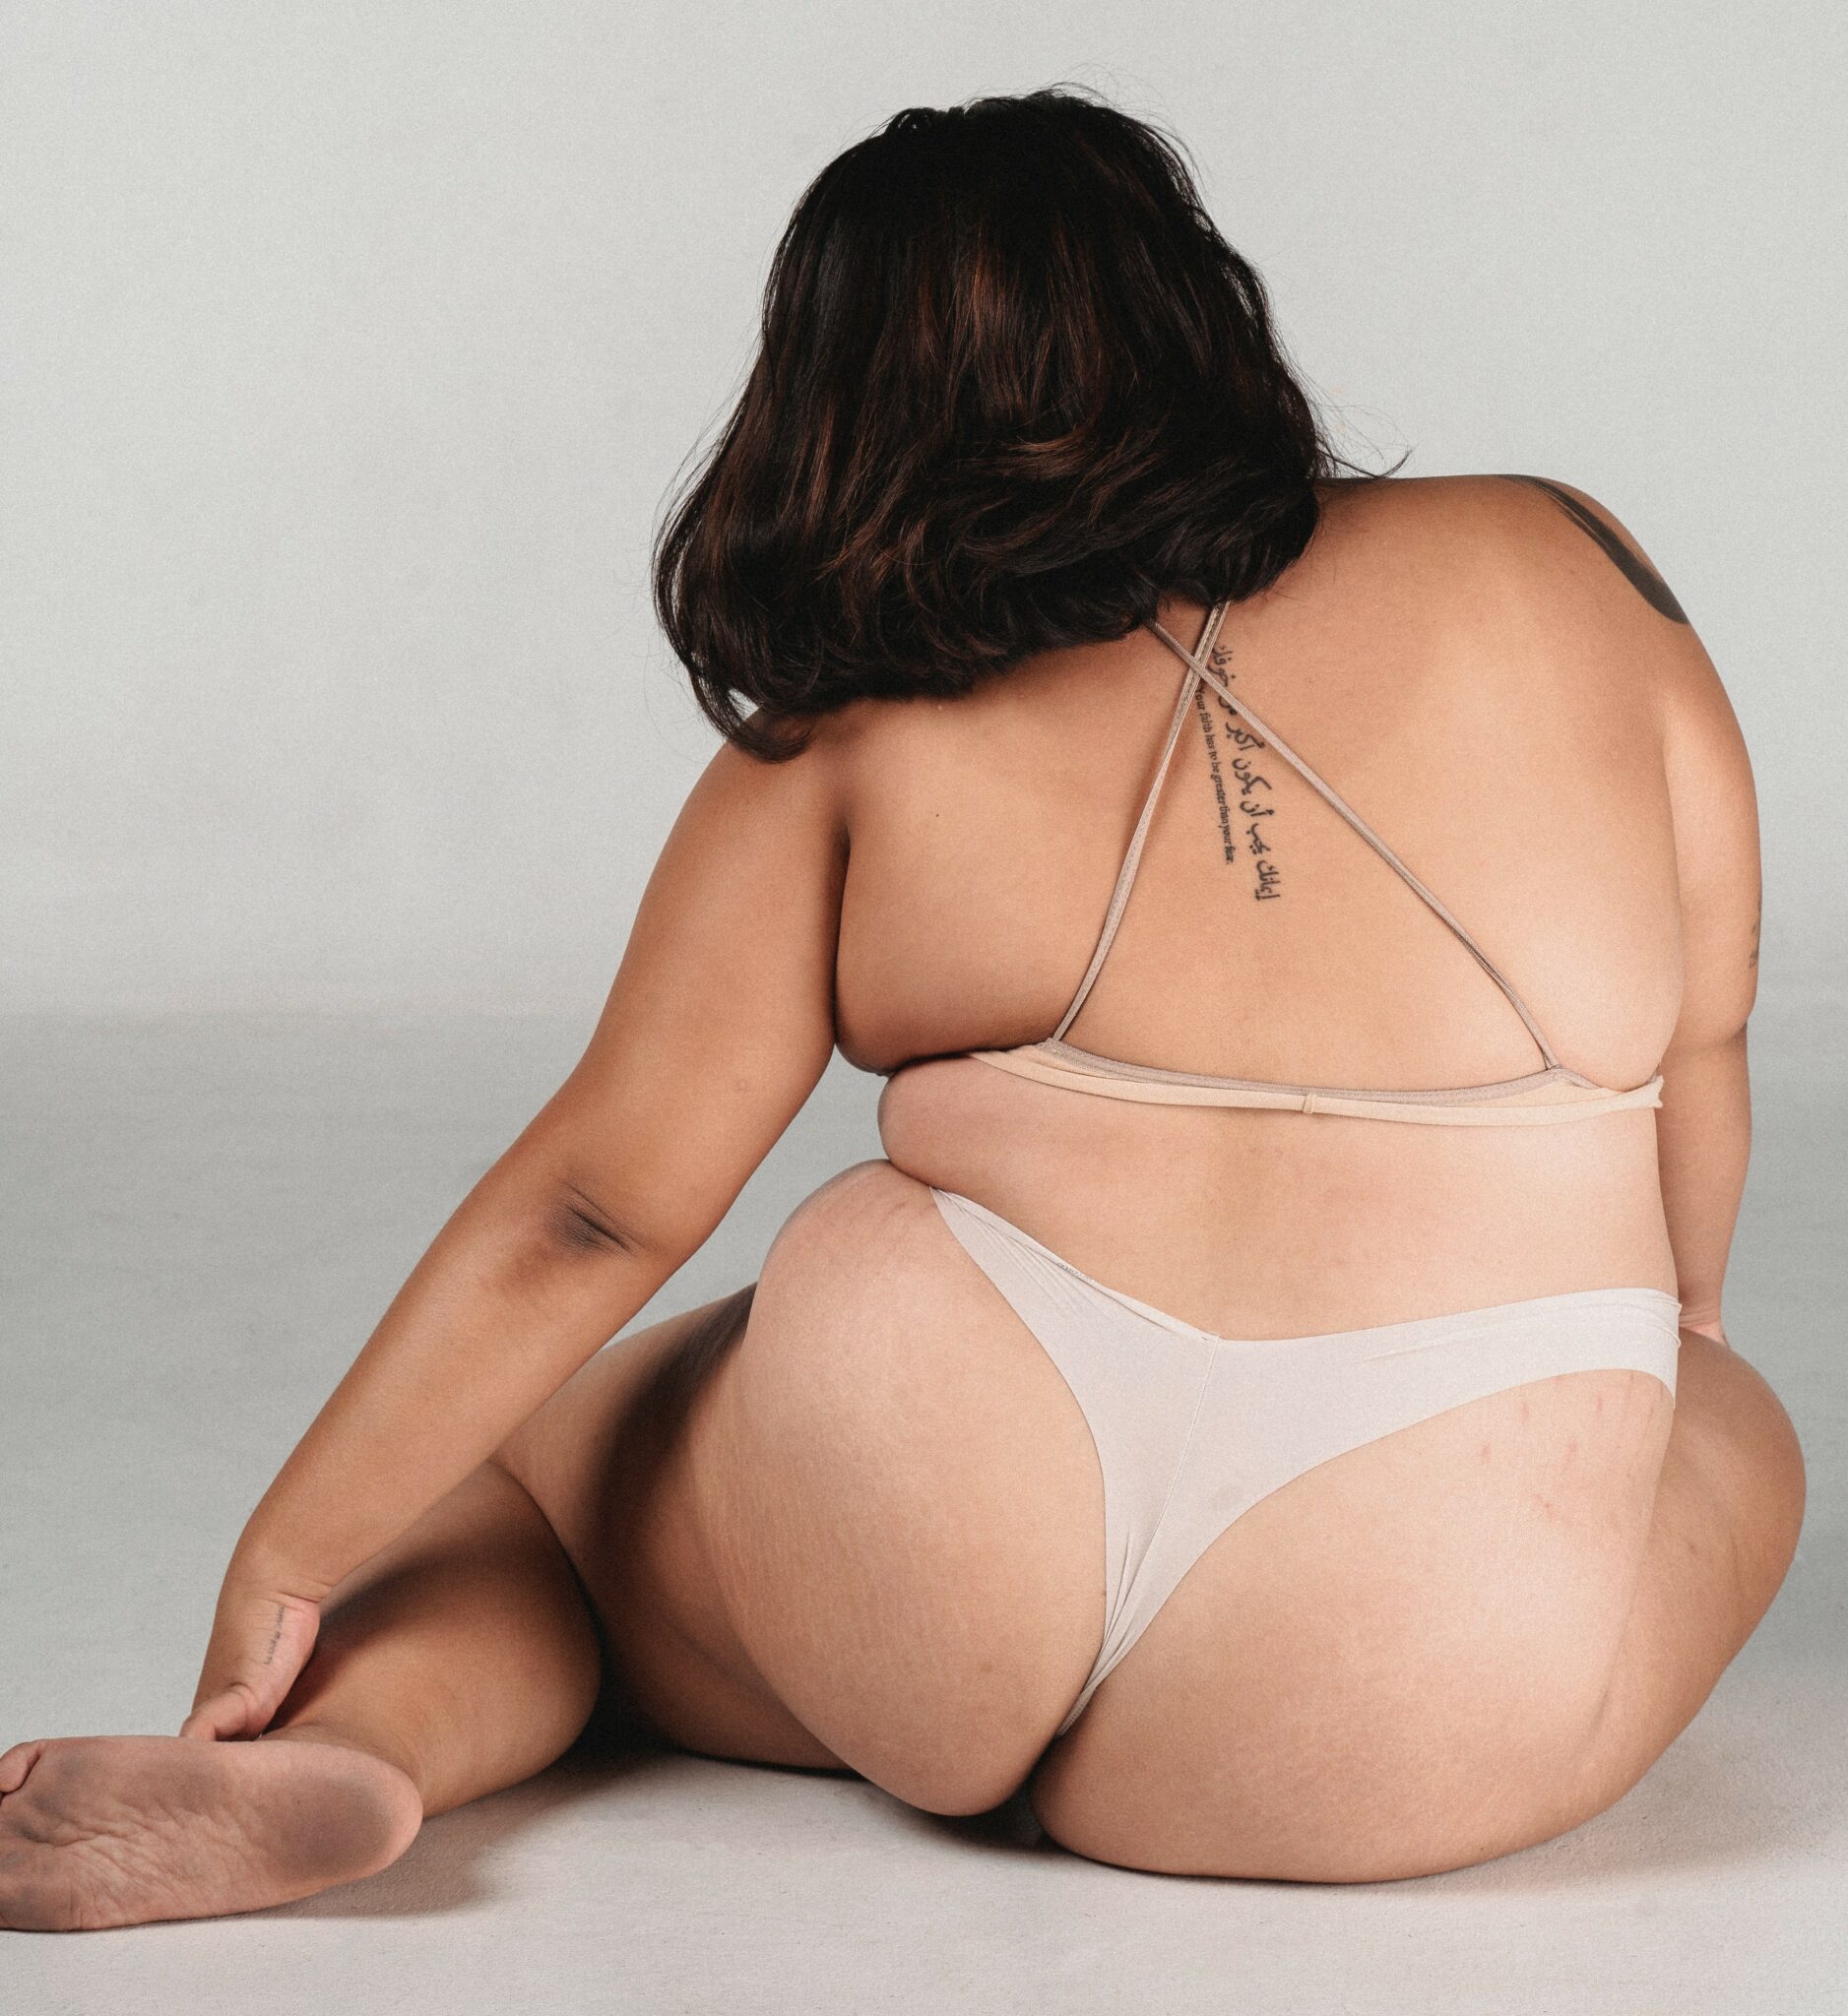 A plus-sized woman posing in a bra and underwear, sitting on the floor with her legs to the side.